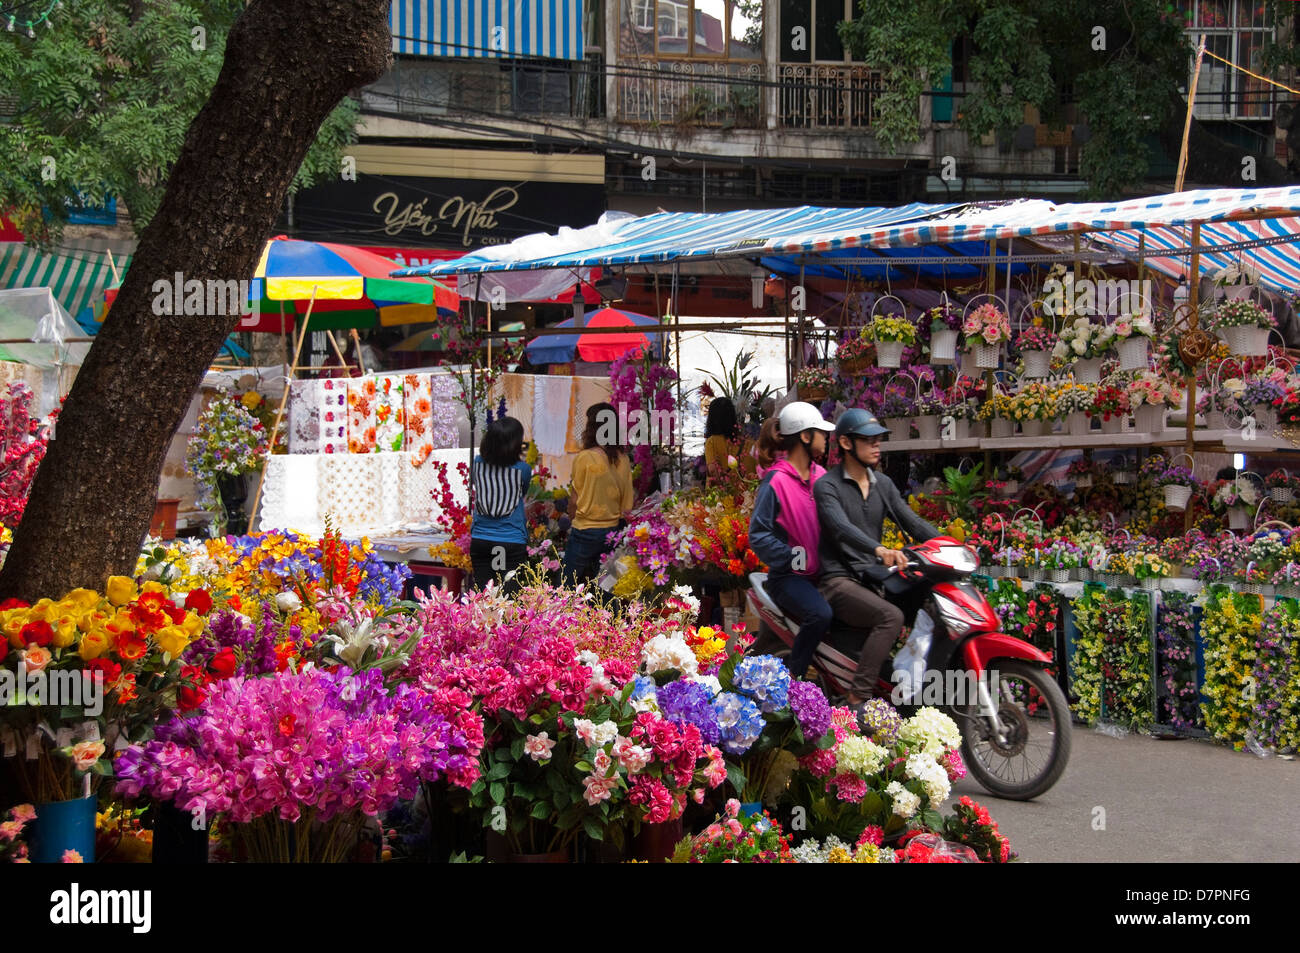 Horizontal close up of the colourful flower market stalls selling arrangements in baskets and bouquets for Tet, Vietnamese New Year. Stock Photo